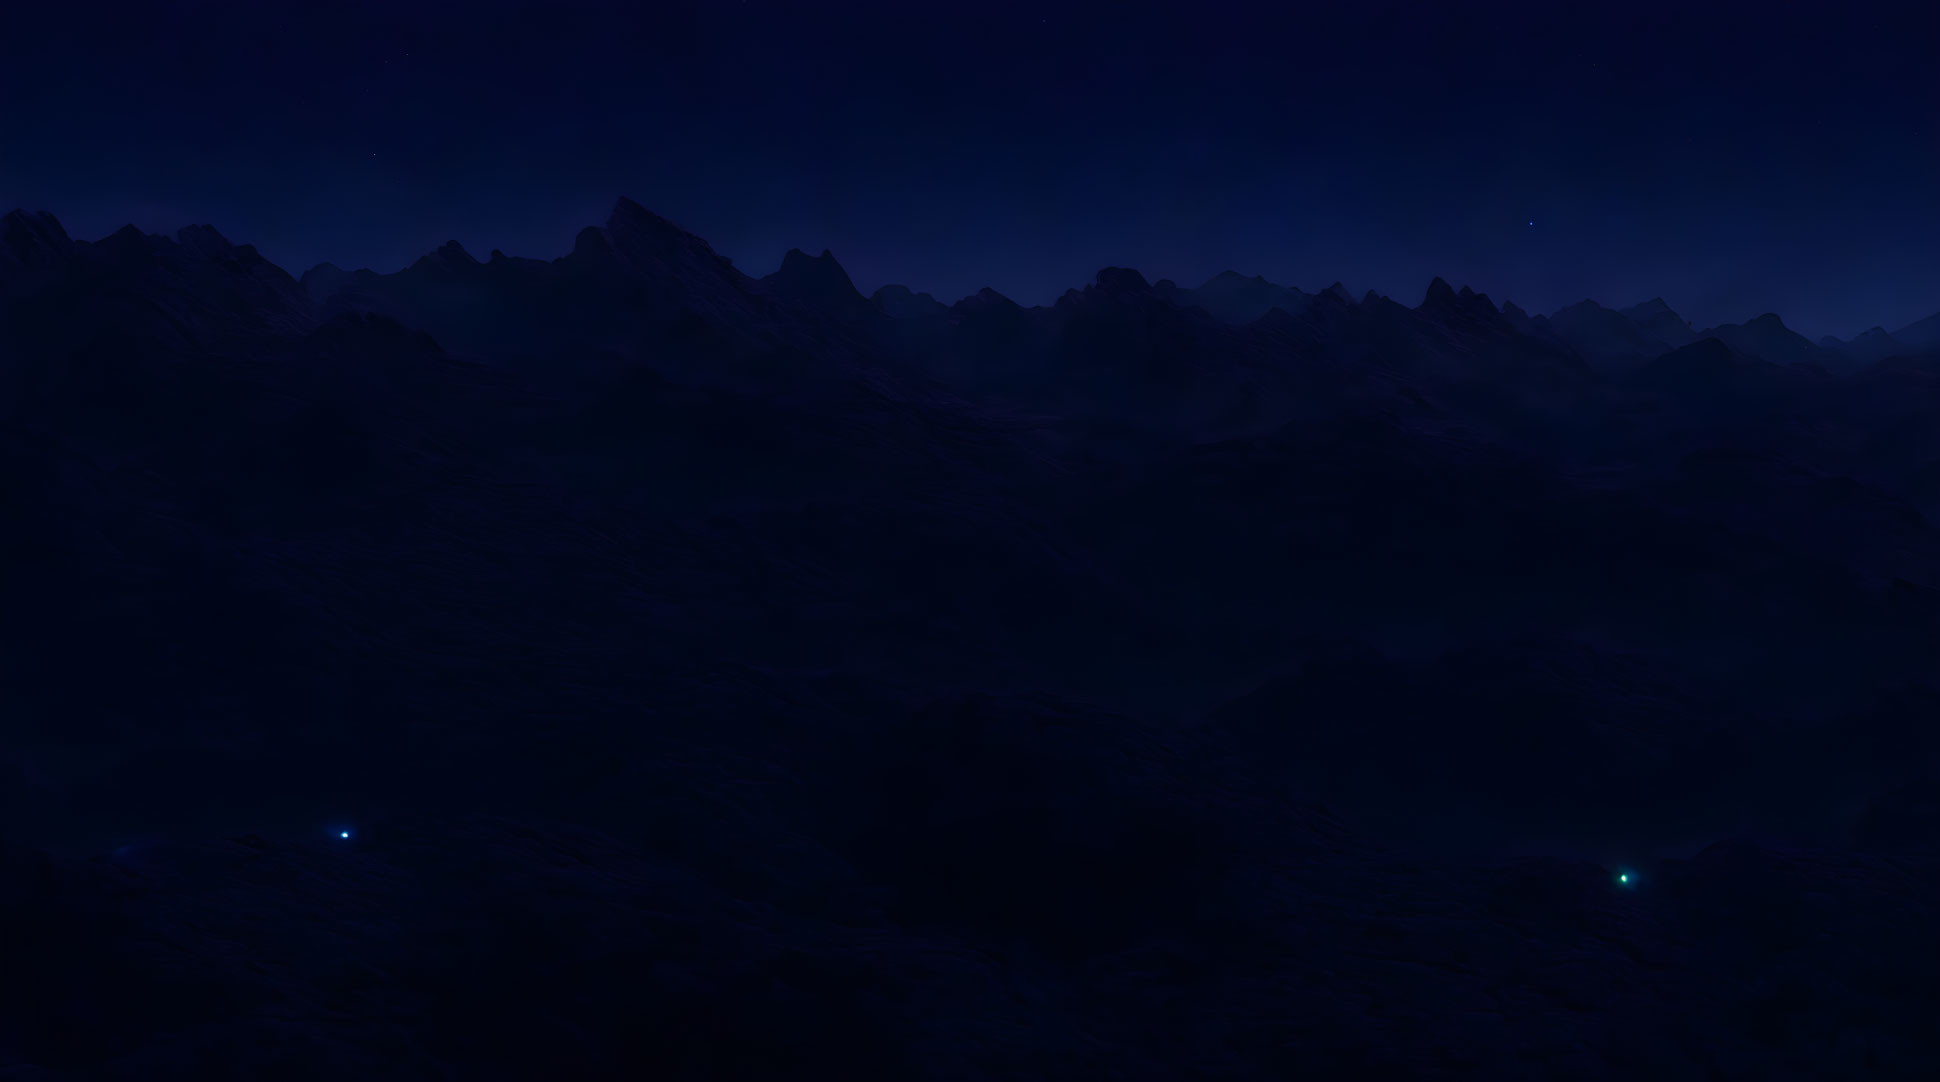 Nocturnal landscape: Silhouetted mountains under starry sky